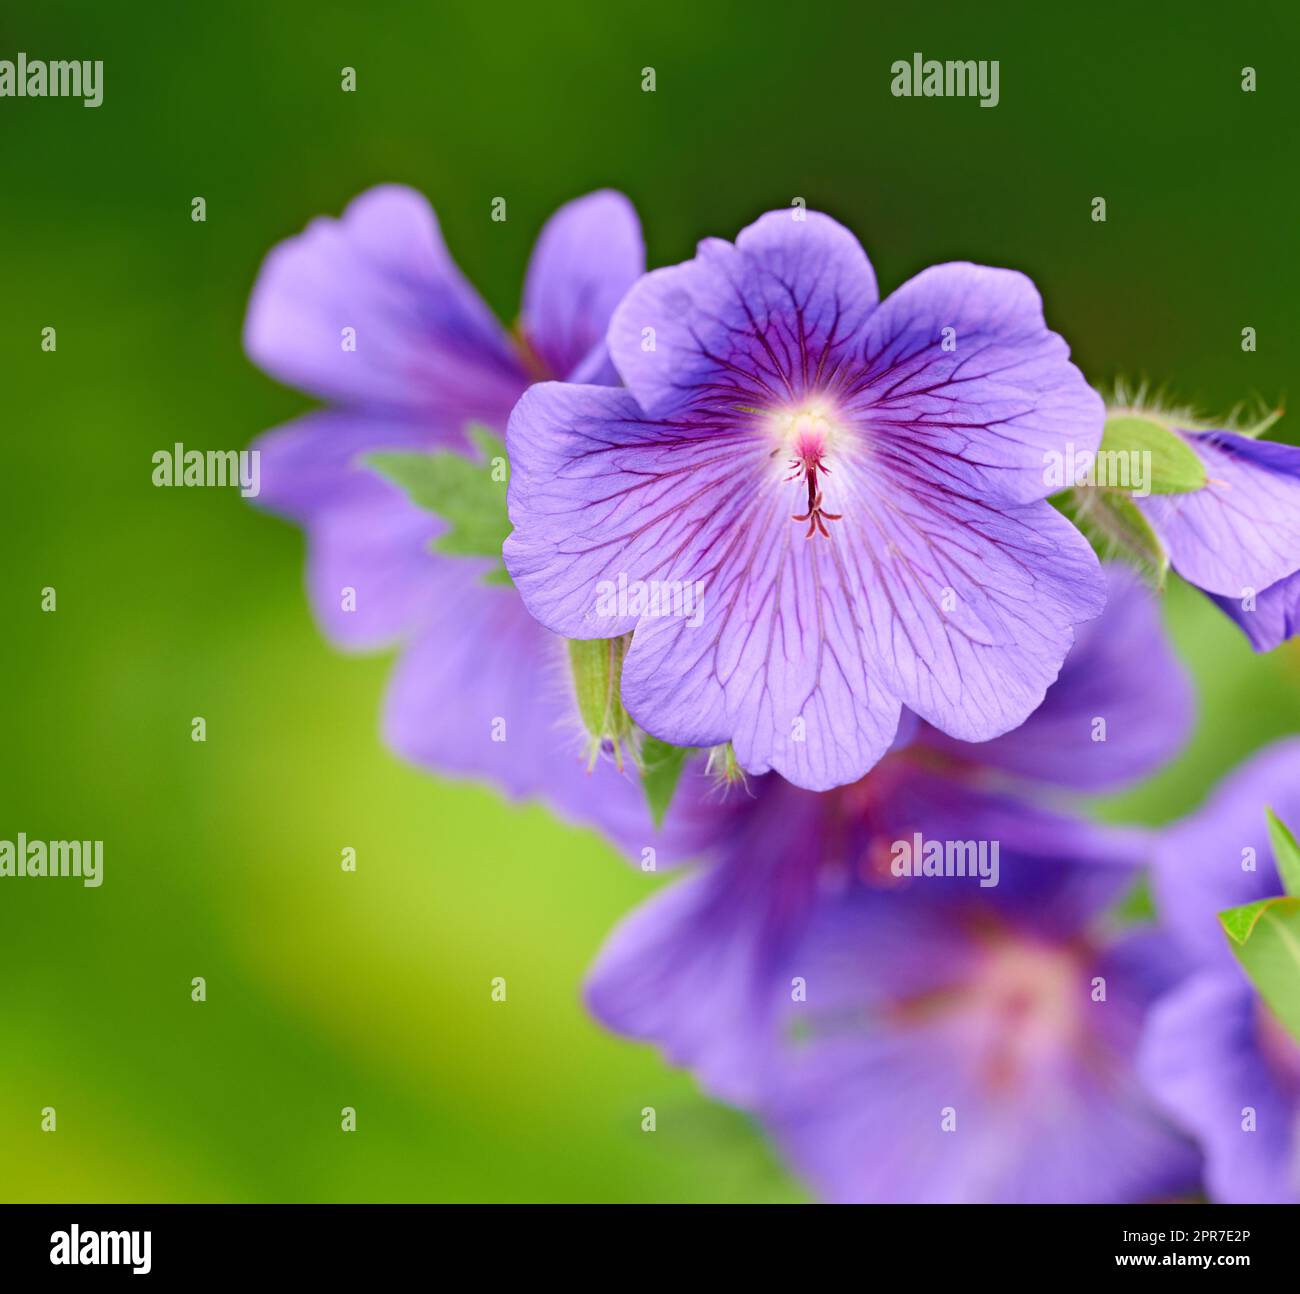 Closeup of purple Cranesbill flowers on green background. Petal details of geranium perennial flowering plant growing in a garden. Pretty colorful gardening blossoms for outdoor landscaping in spring Stock Photo